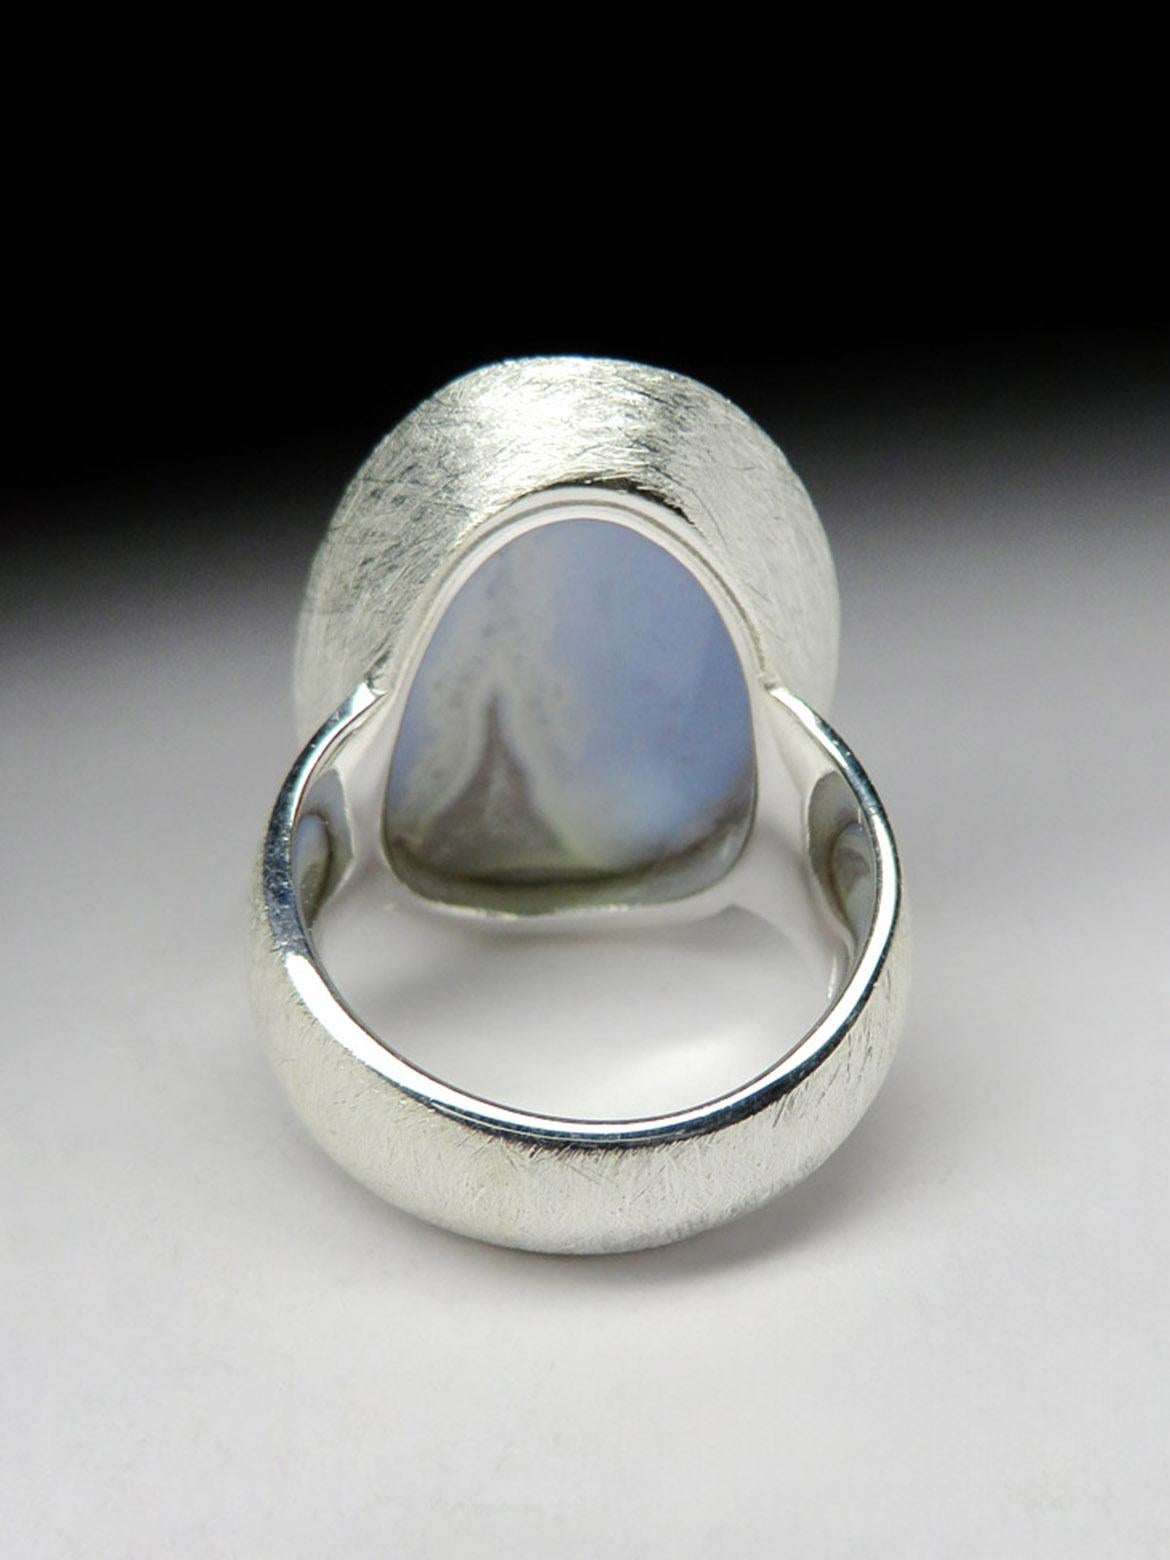 Big Blue Lace Agate Silver Ring Geologist gift large statement ring In New Condition For Sale In Berlin, DE